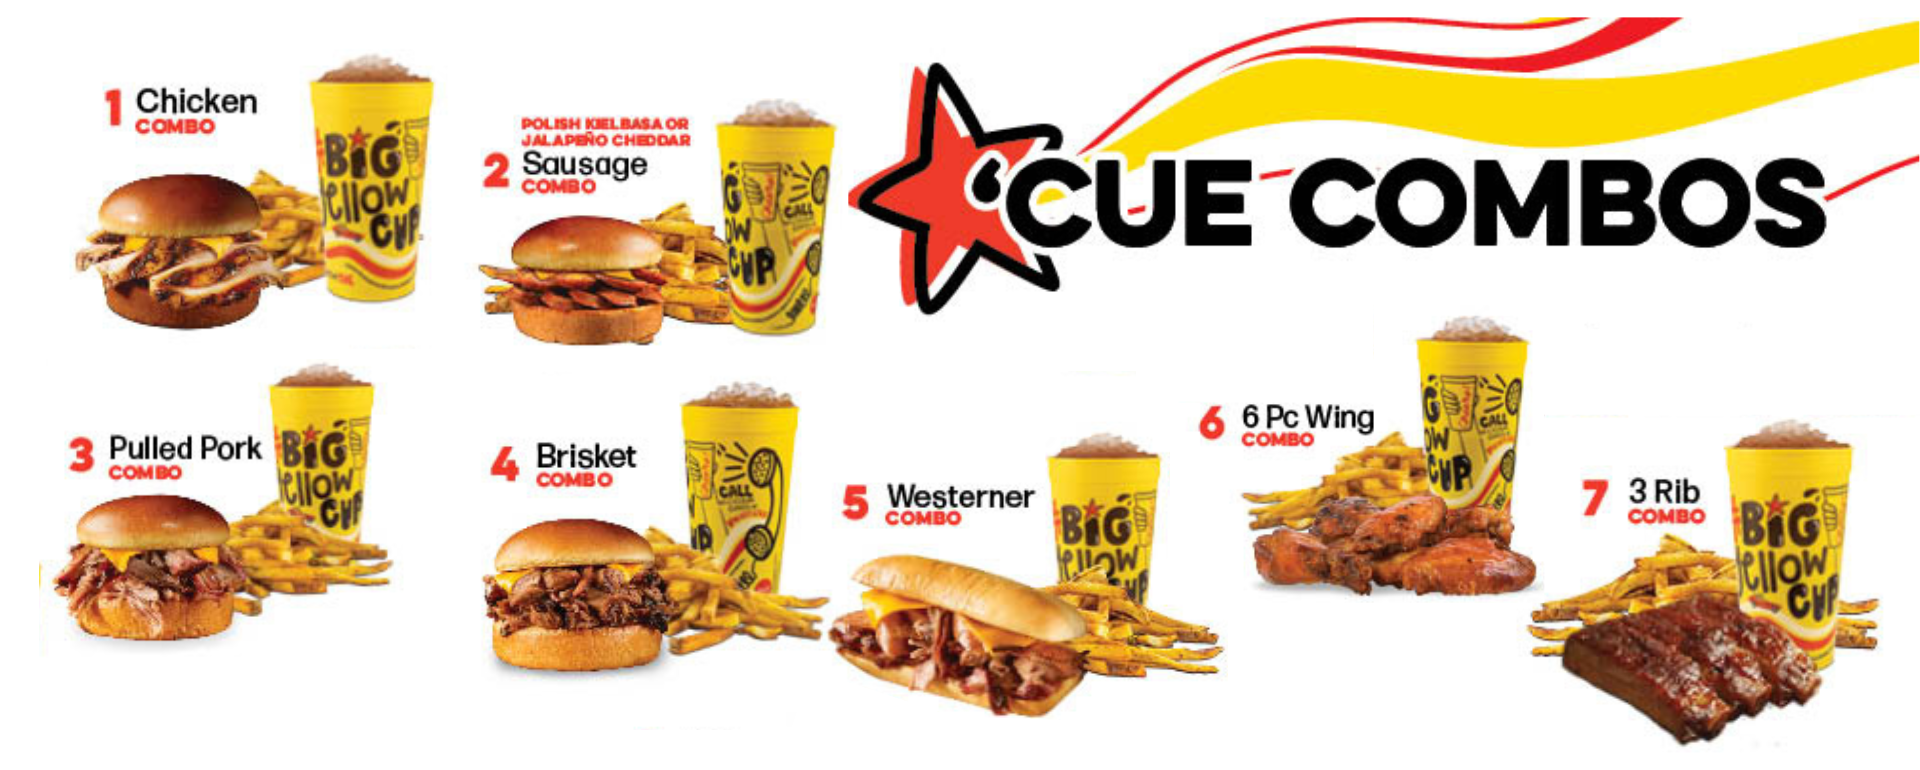 Make it a meal! 'Cue Combos just for you.